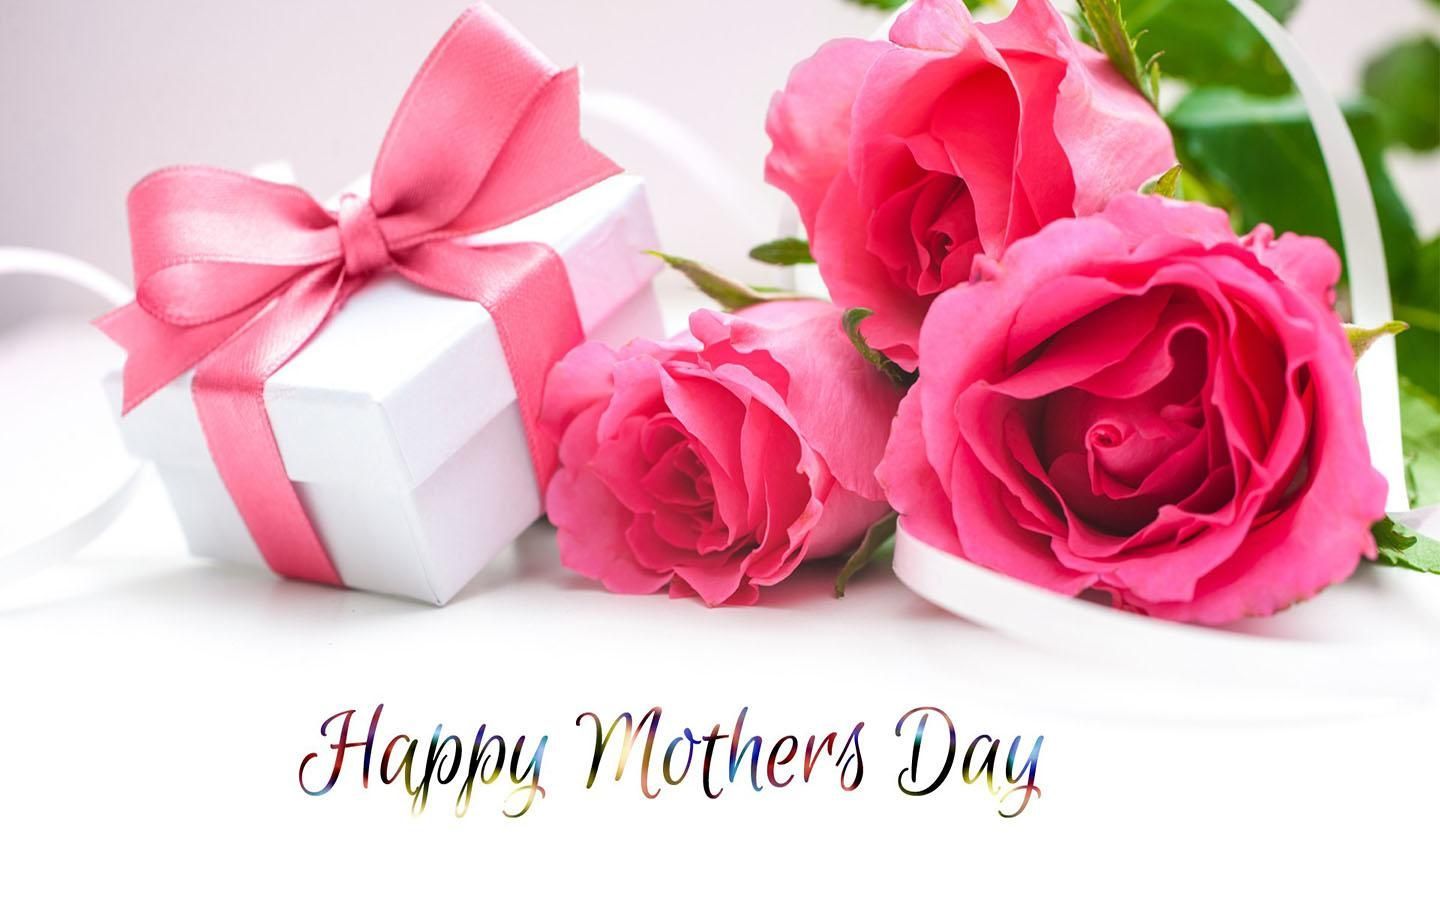 Mothers Day Wallpaper. Happy mothers day wallpaper